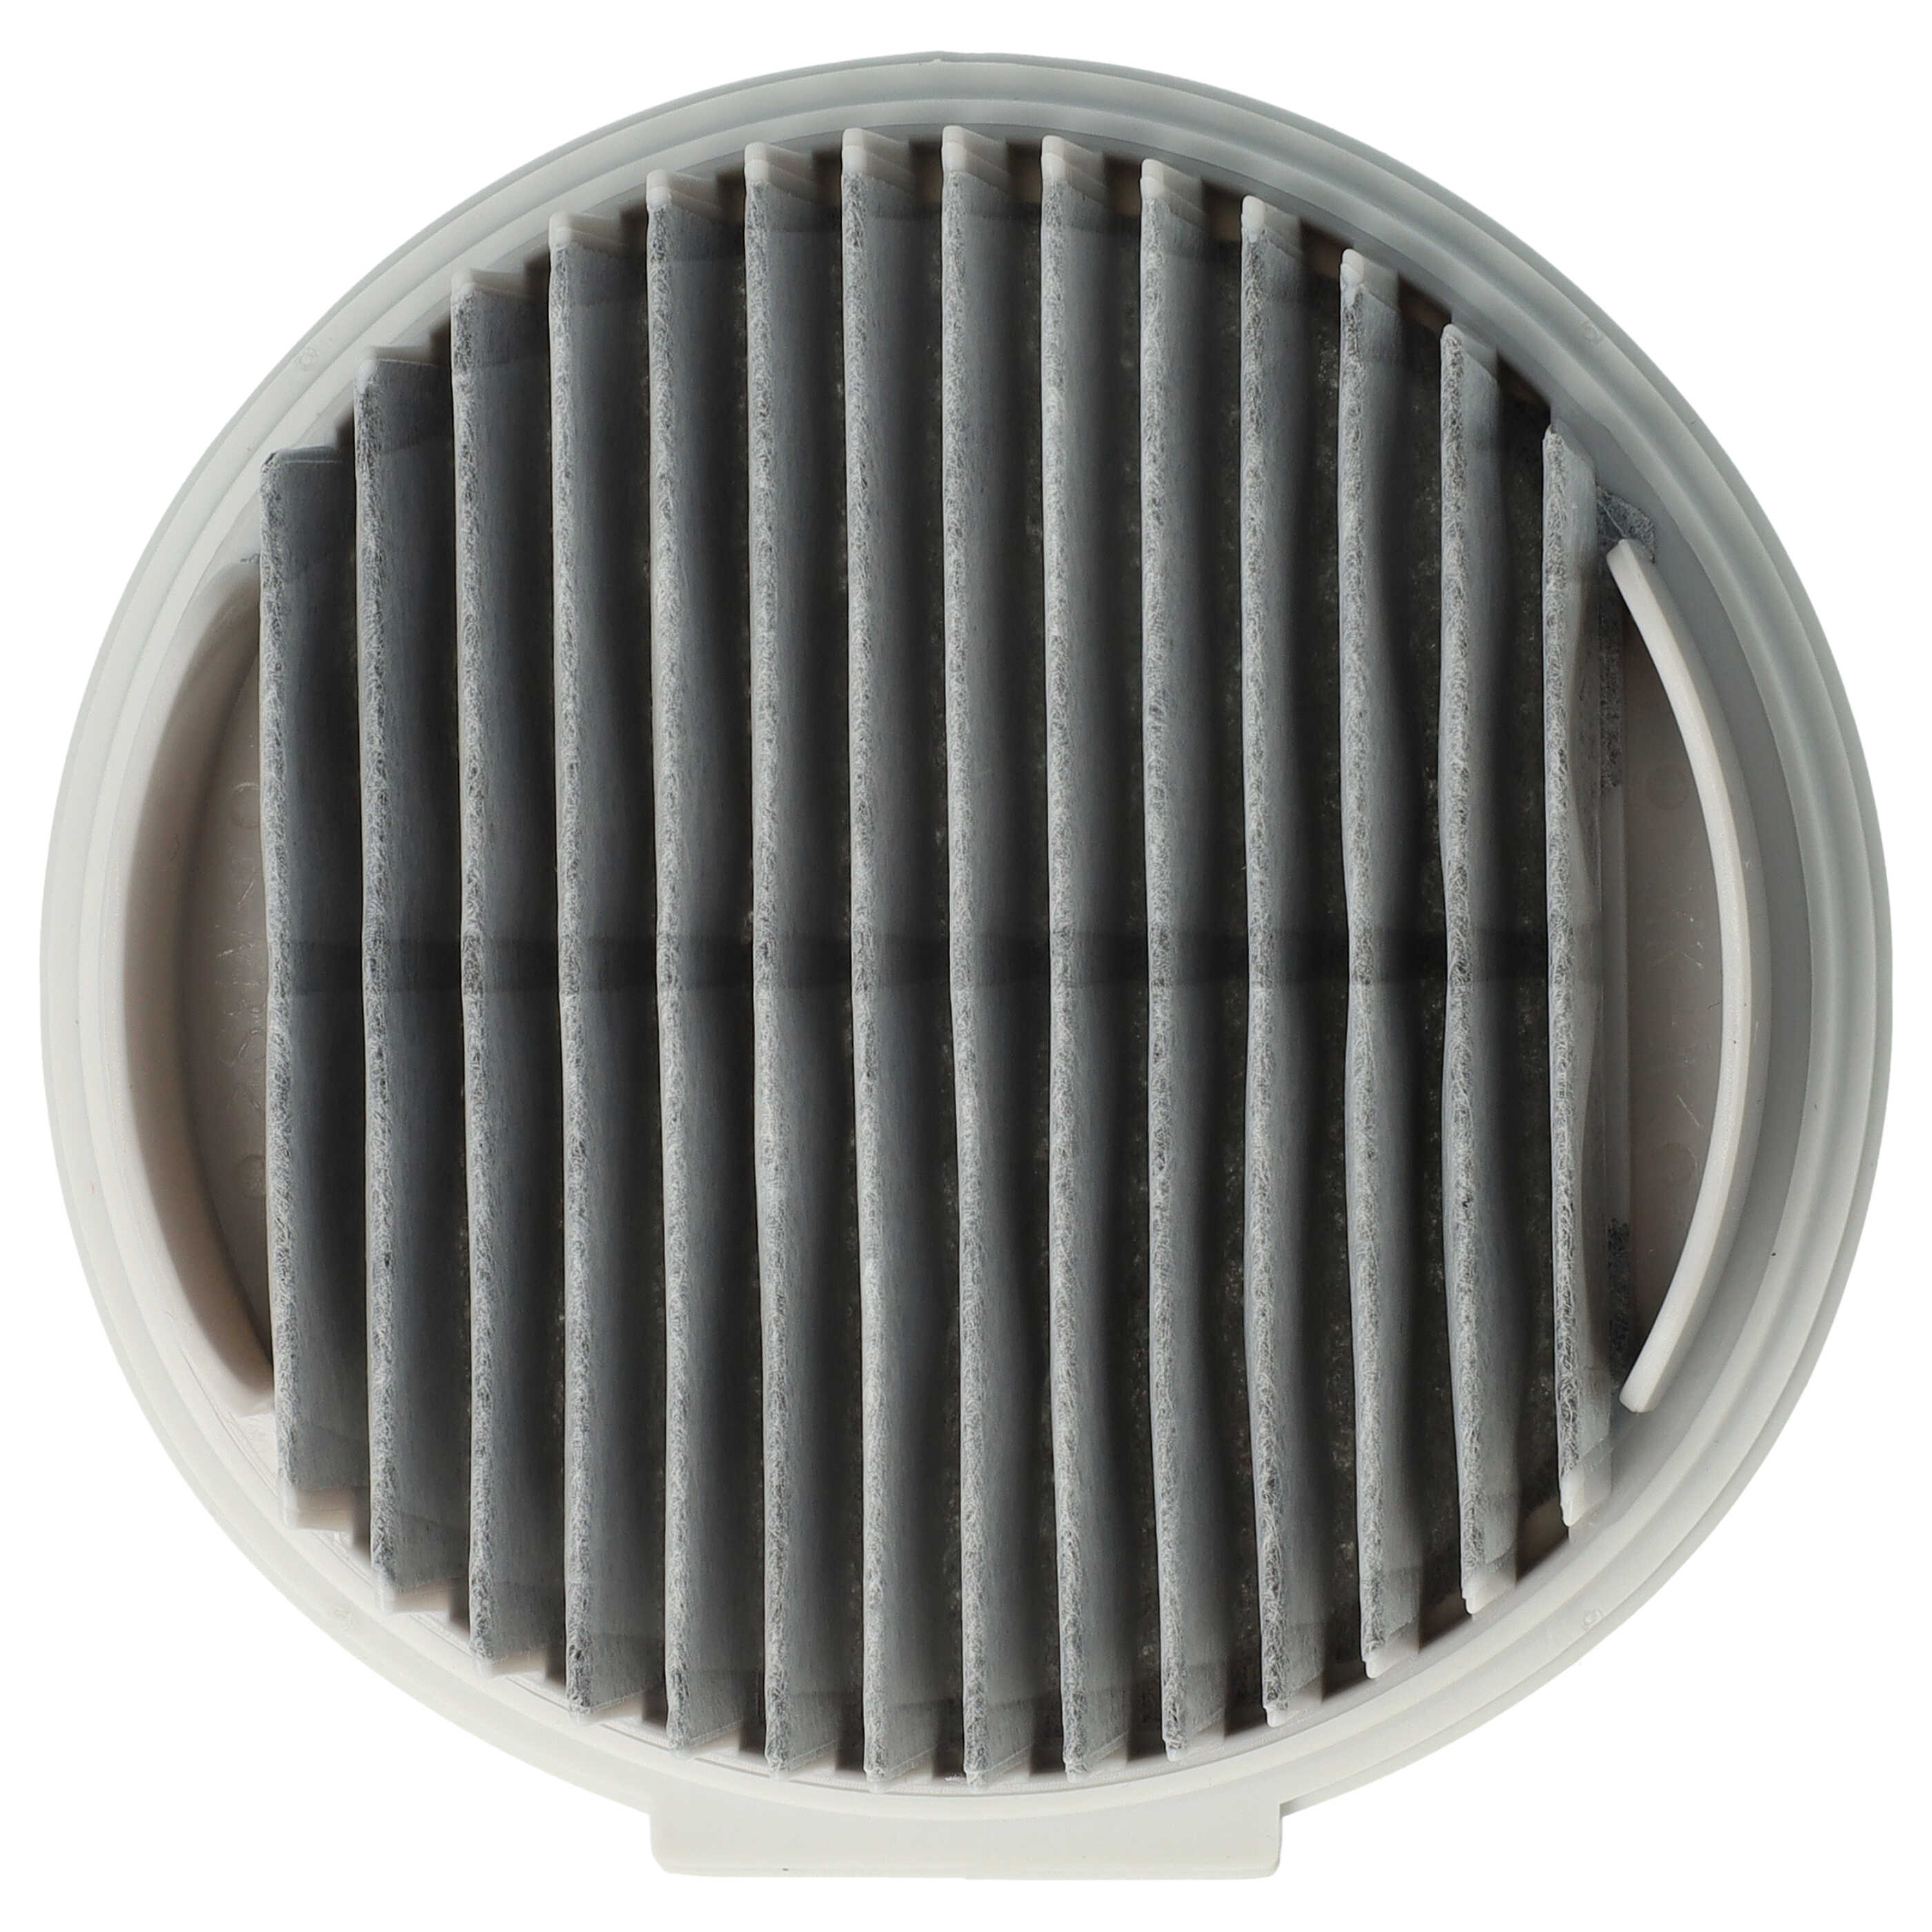 1x replacement filter suitable for Xiaomi Roidmi F8, F8E Vacuum Cleaner